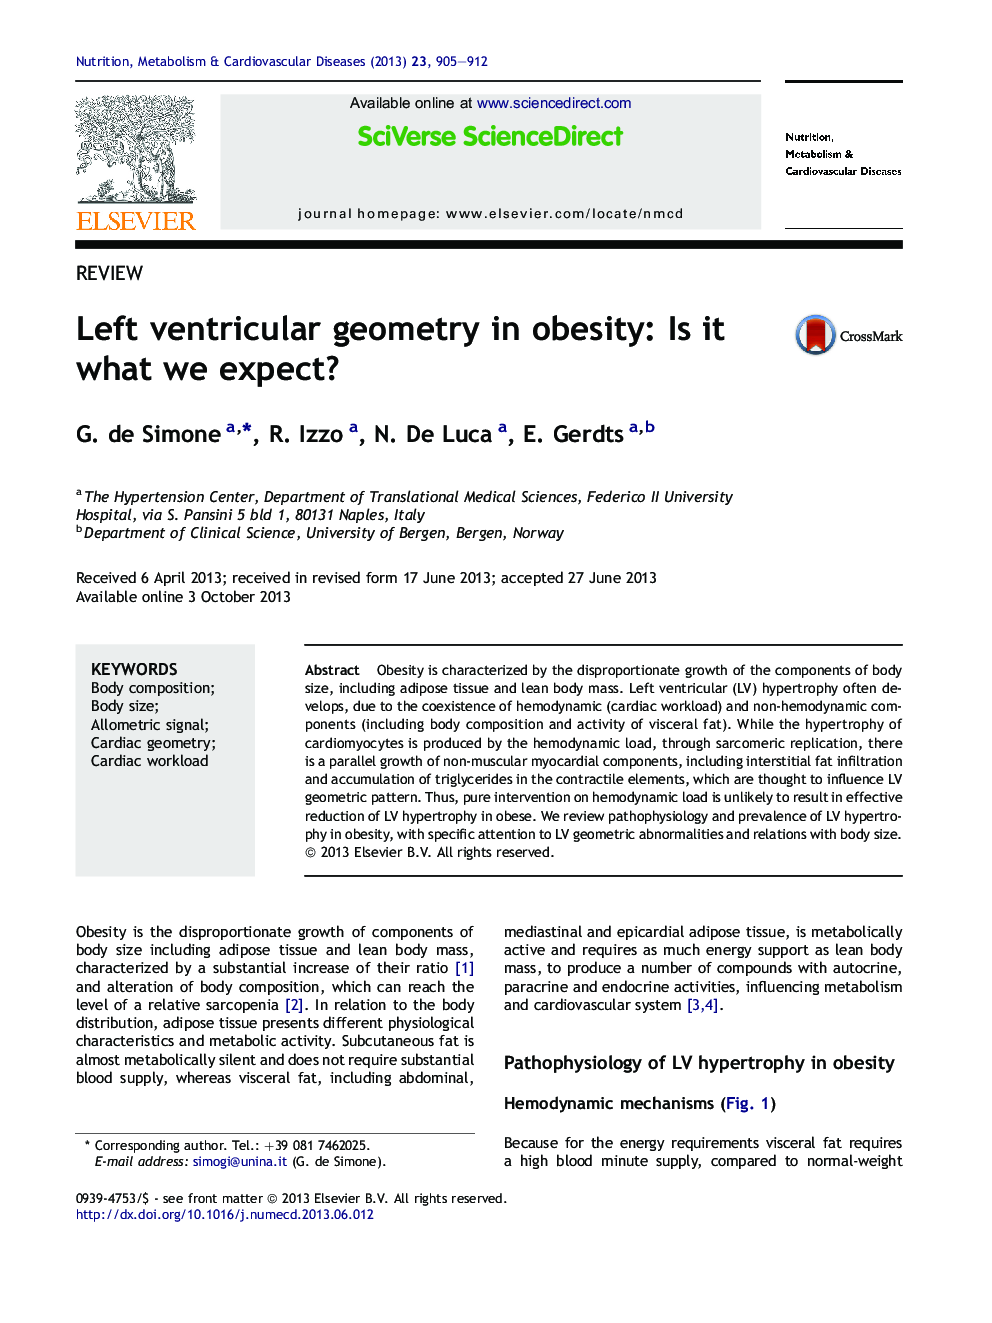 Left ventricular geometry in obesity: Is it what we expect?